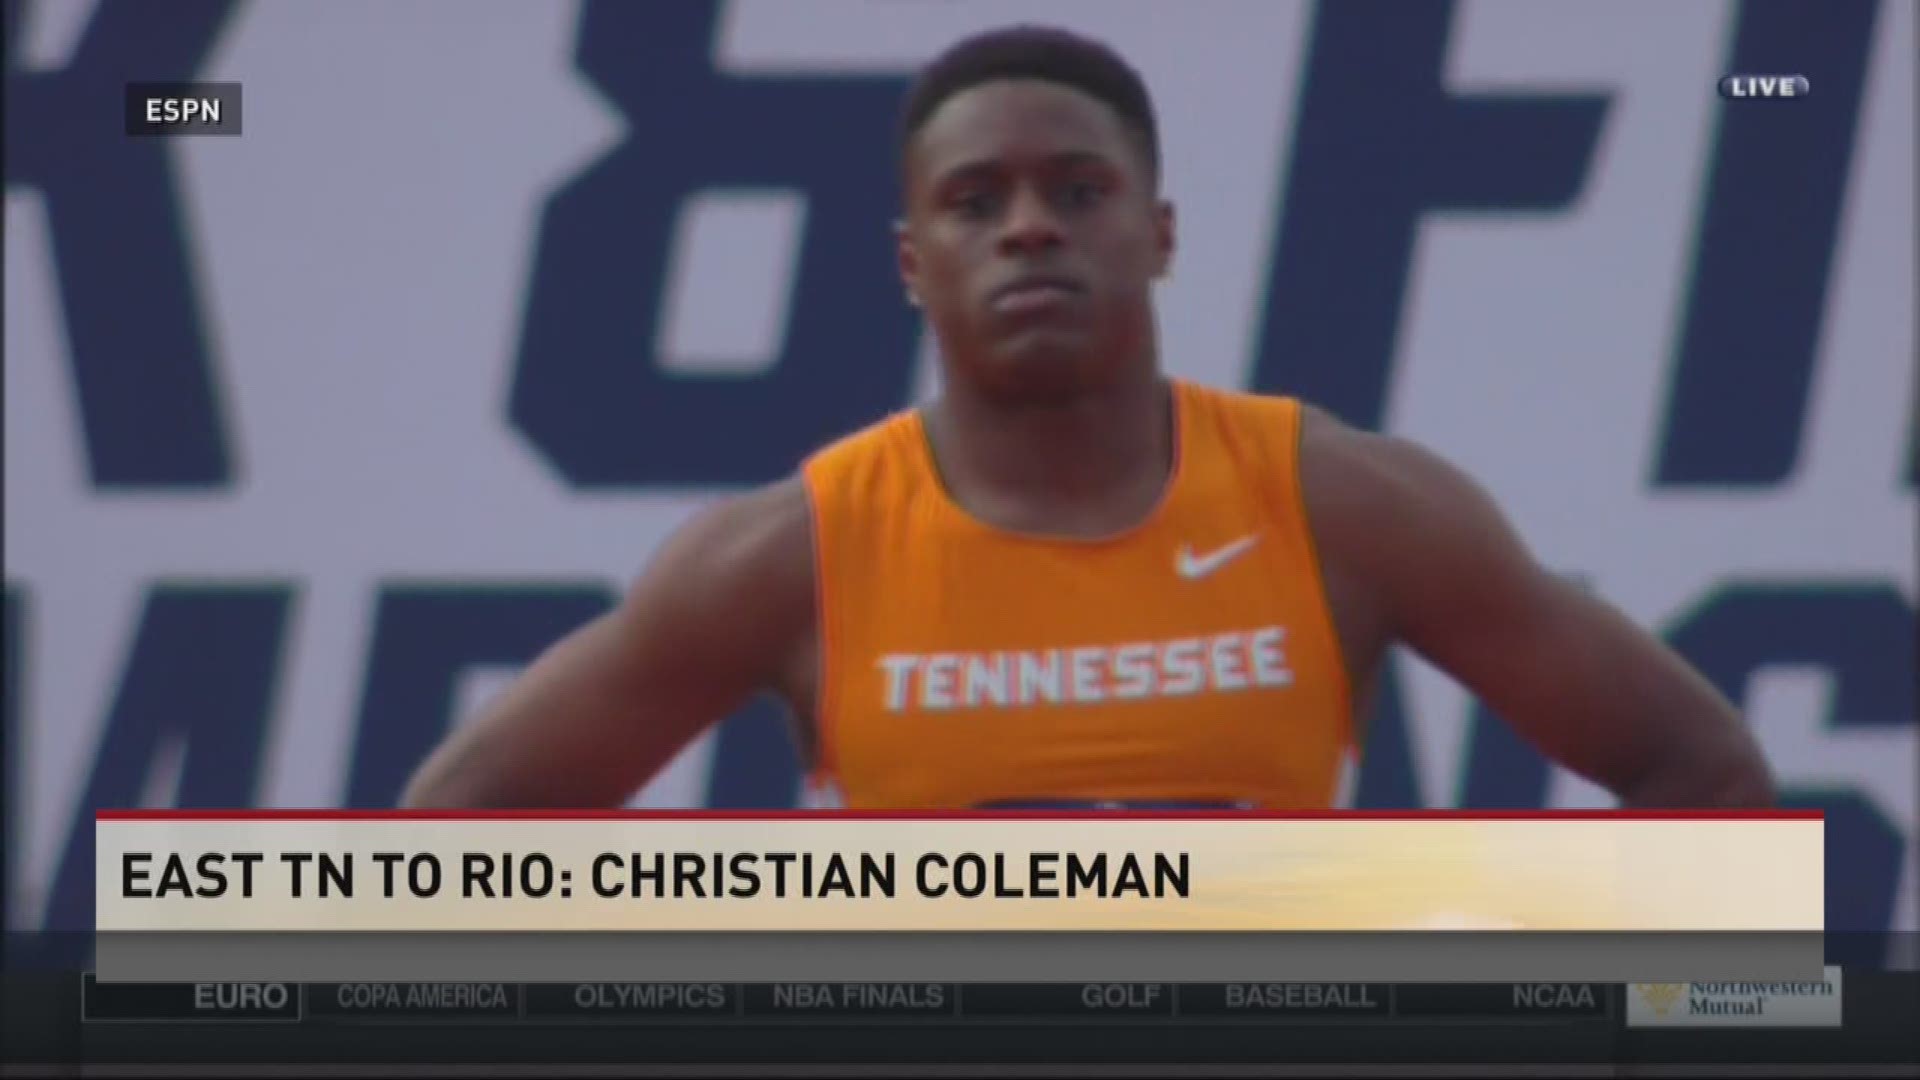 Christian Coleman will participate in the 4x100-meter relay at Rio.